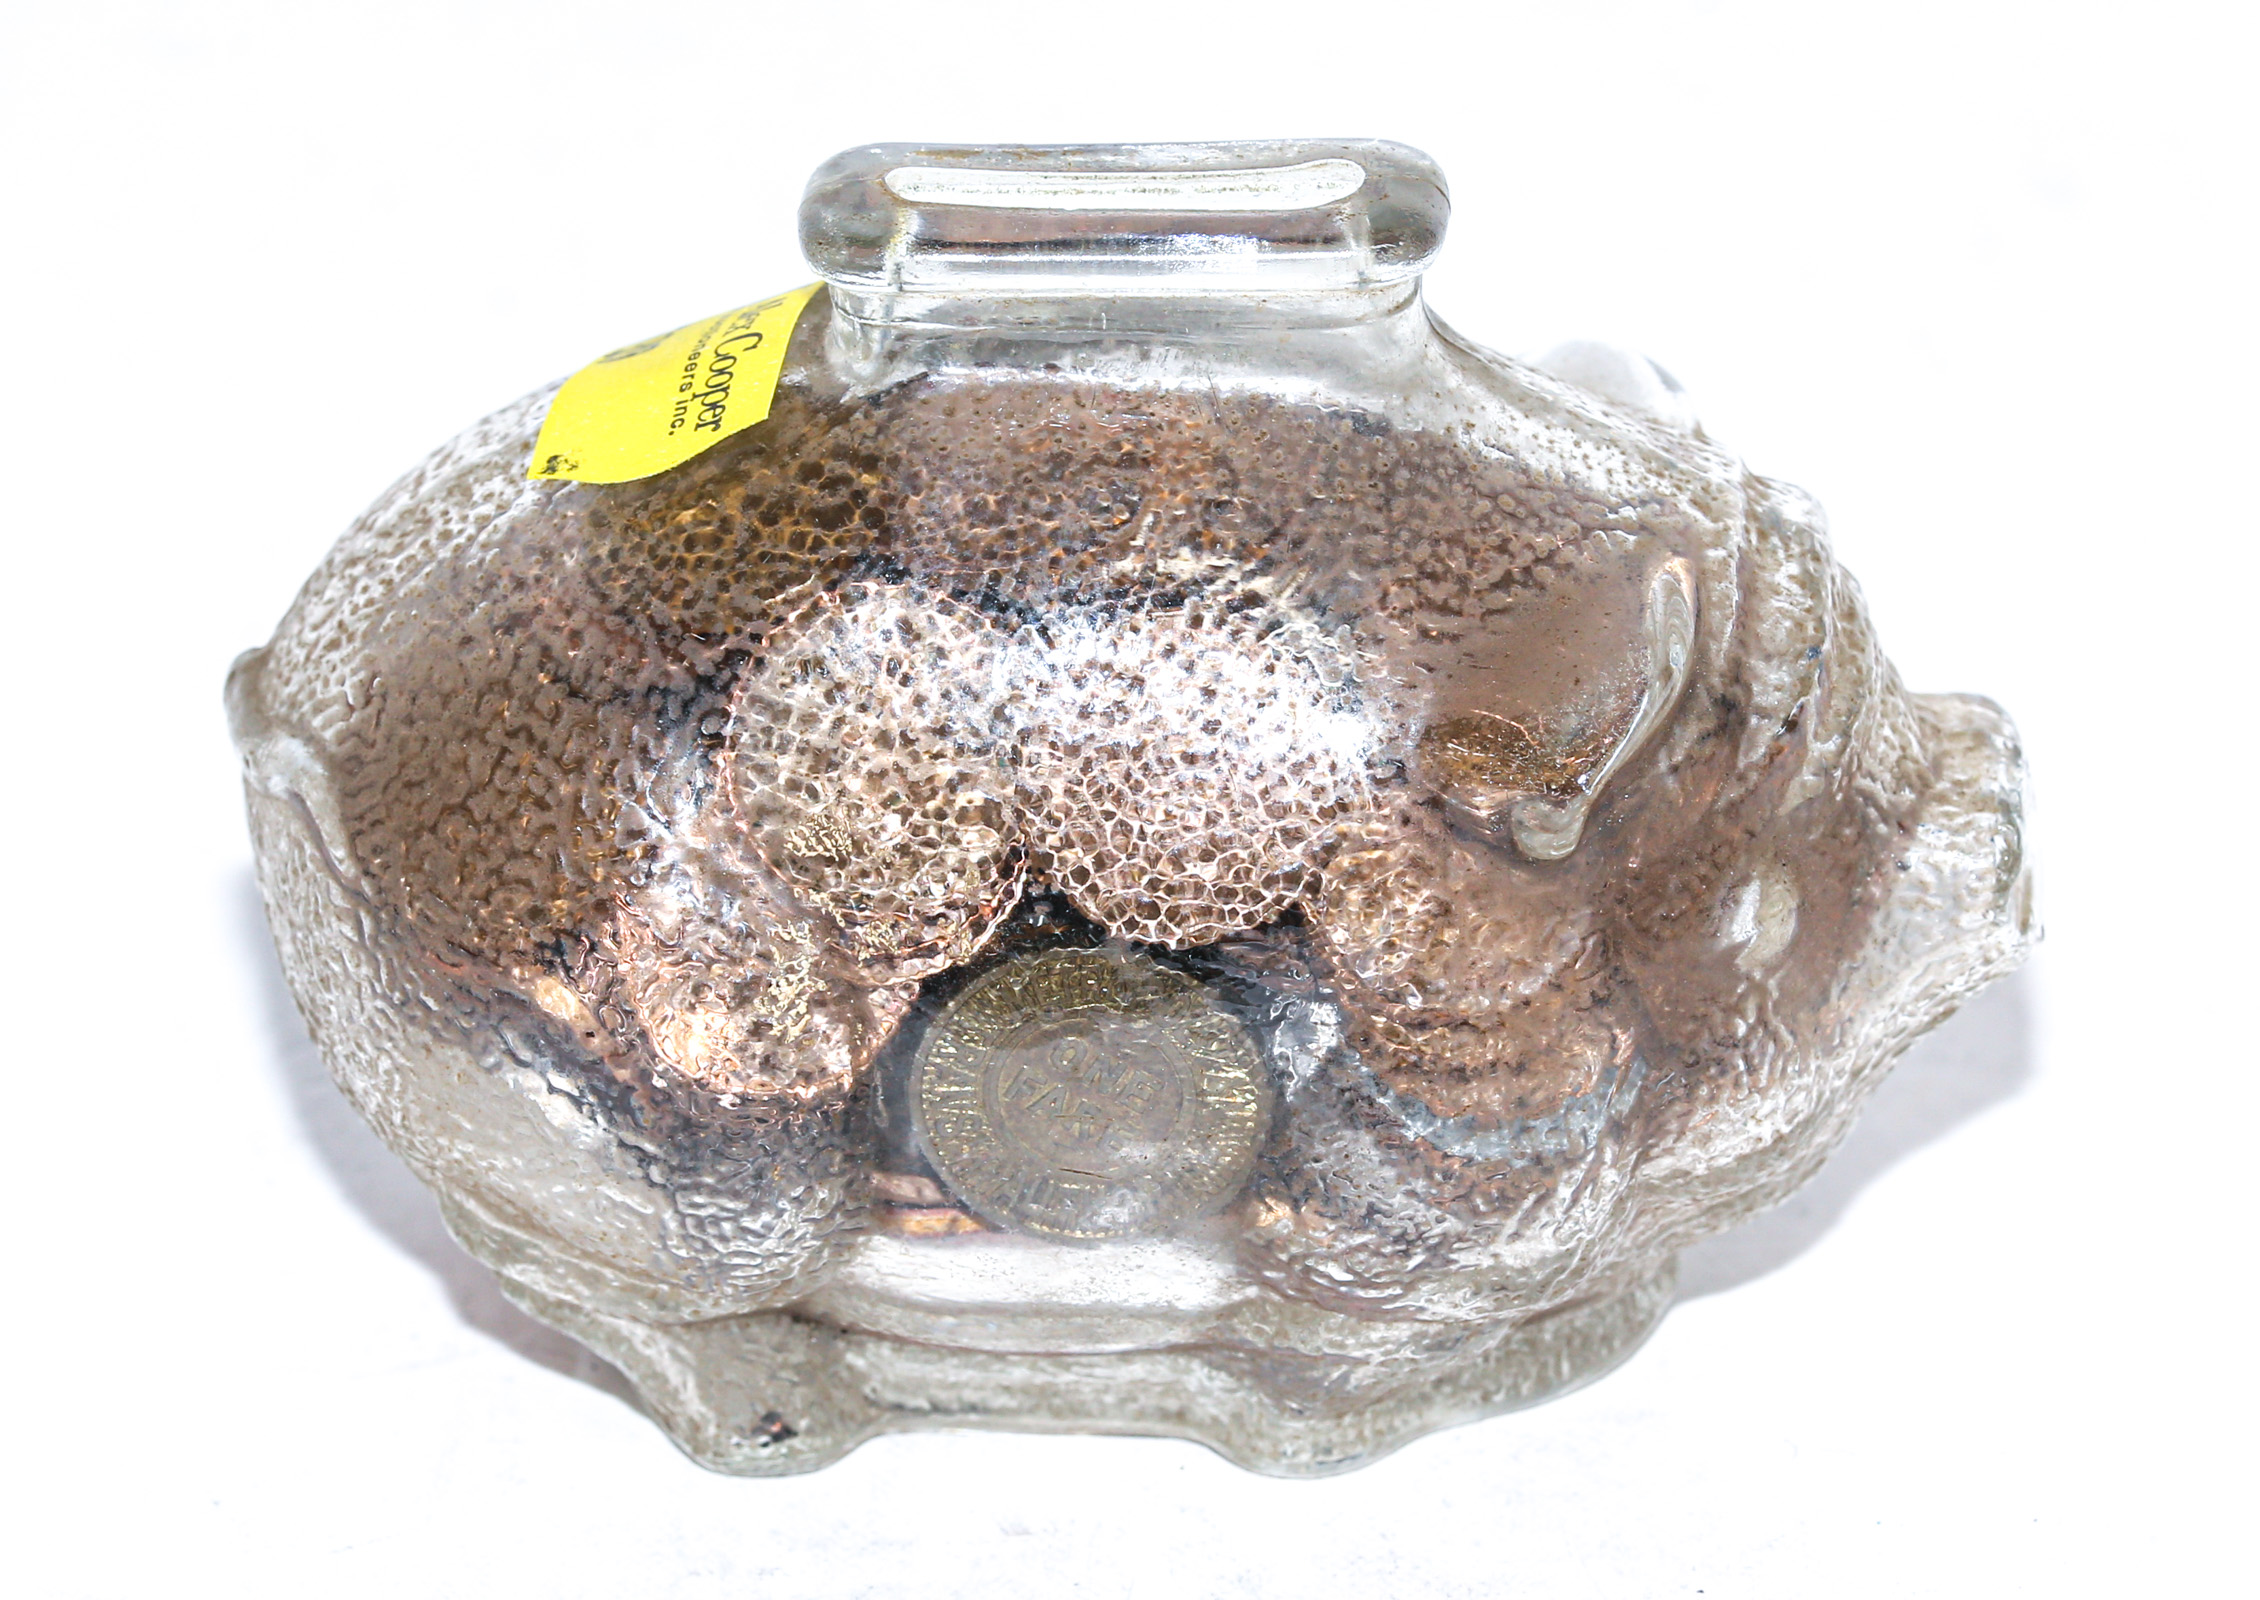 GLASS PIGGY BANK FILLED WITH COINS 369d68